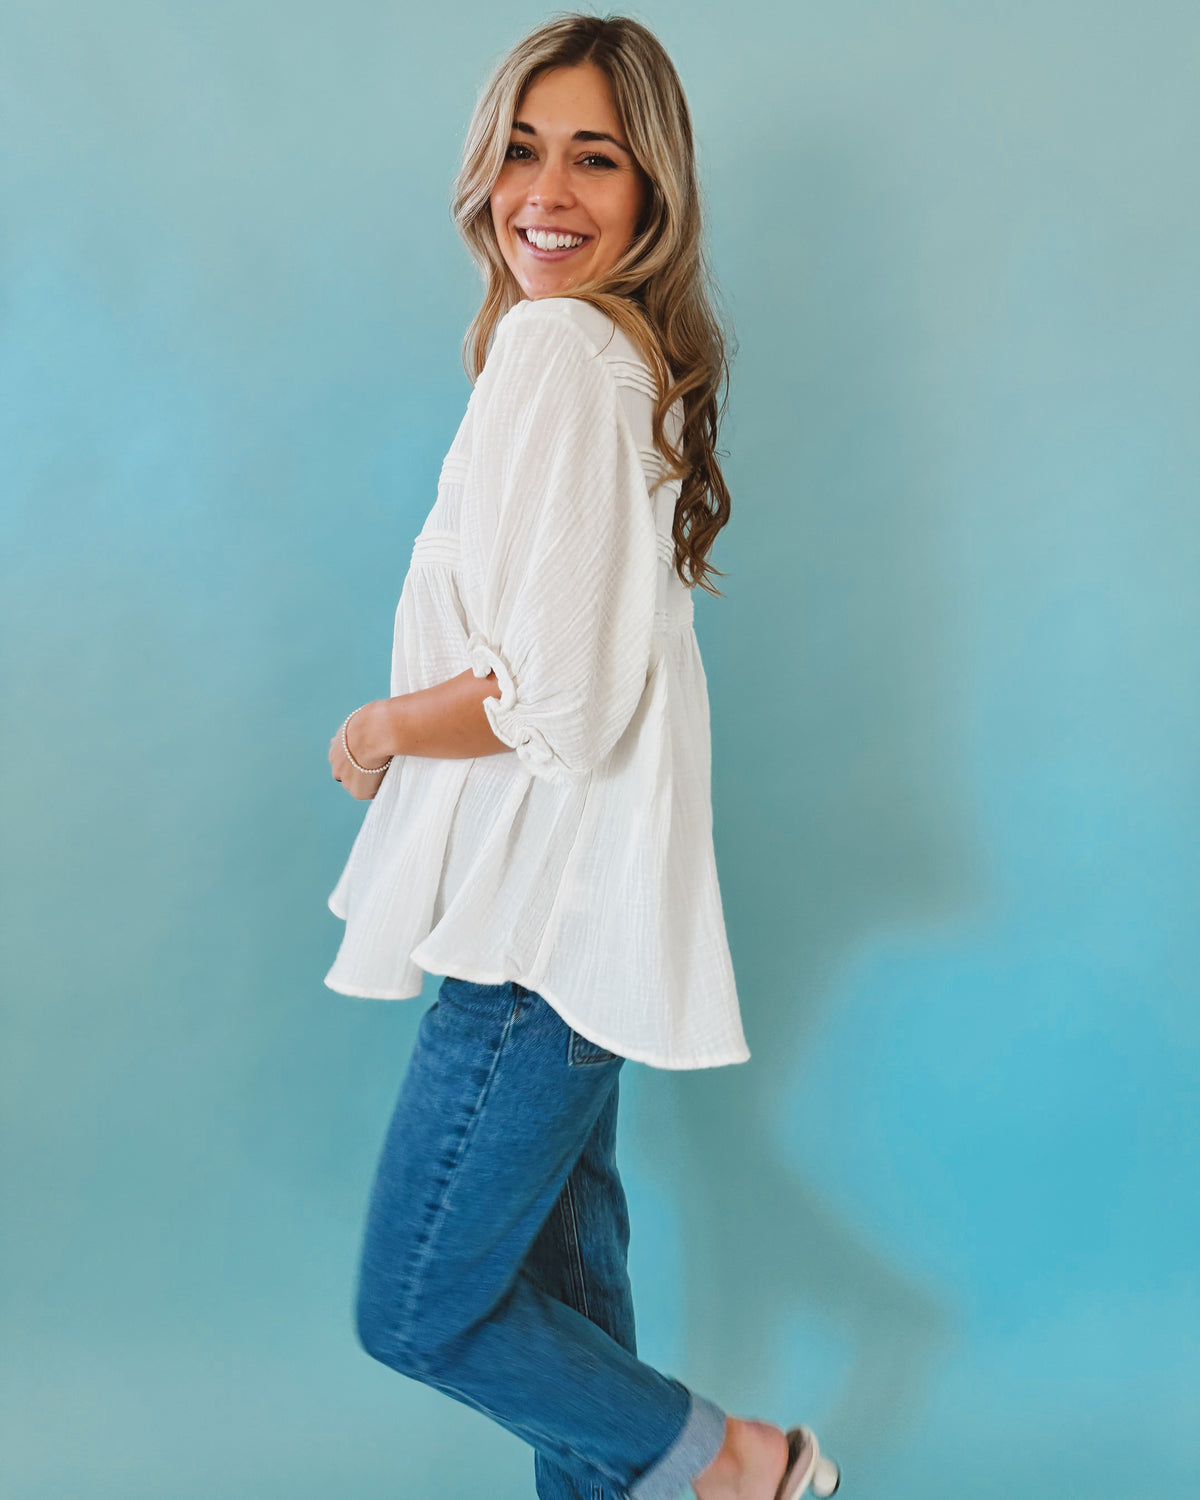 Cambria Top in Ivory